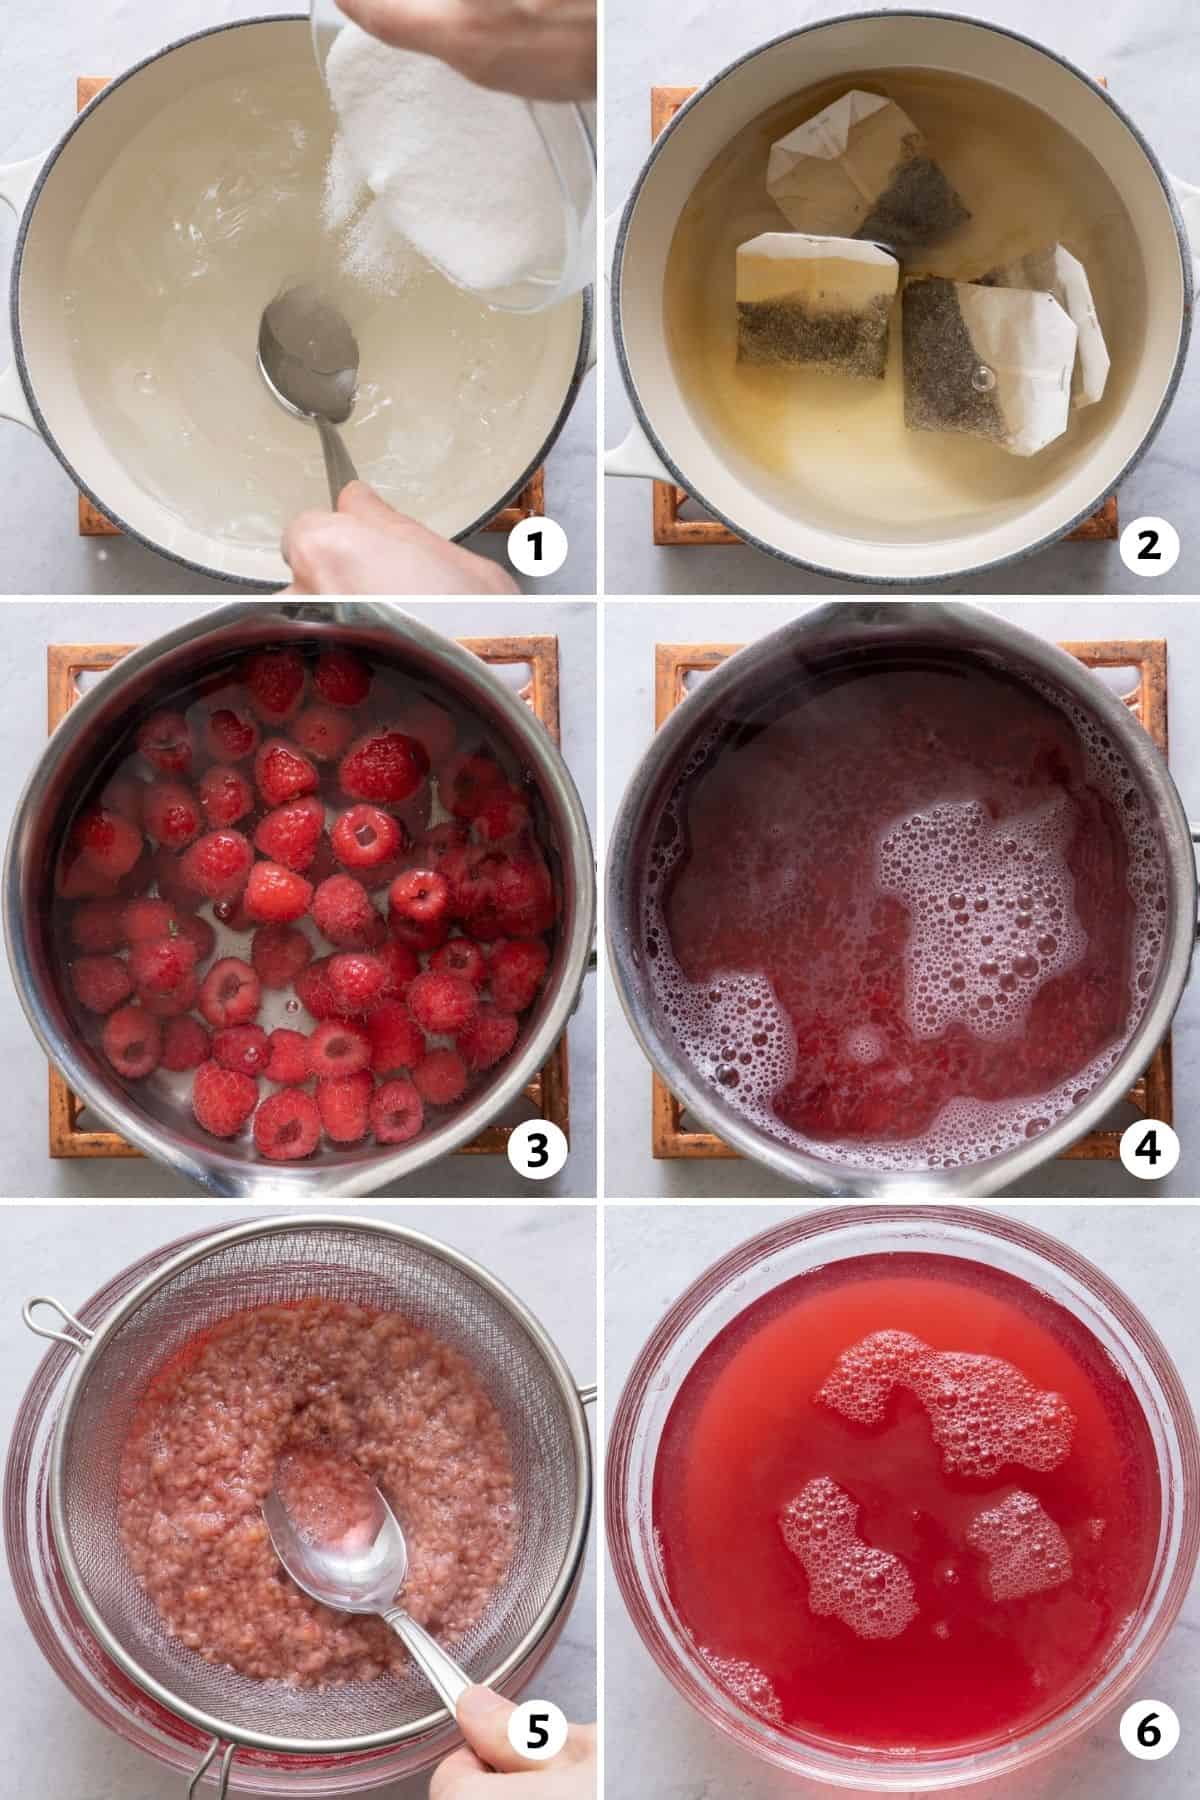 6 image collage of steps to making tea recipe: add sugar to boiling water, add raspberries, cook down raspberries, pour through fine mesh sieve, then remaining juice is ready for tea.